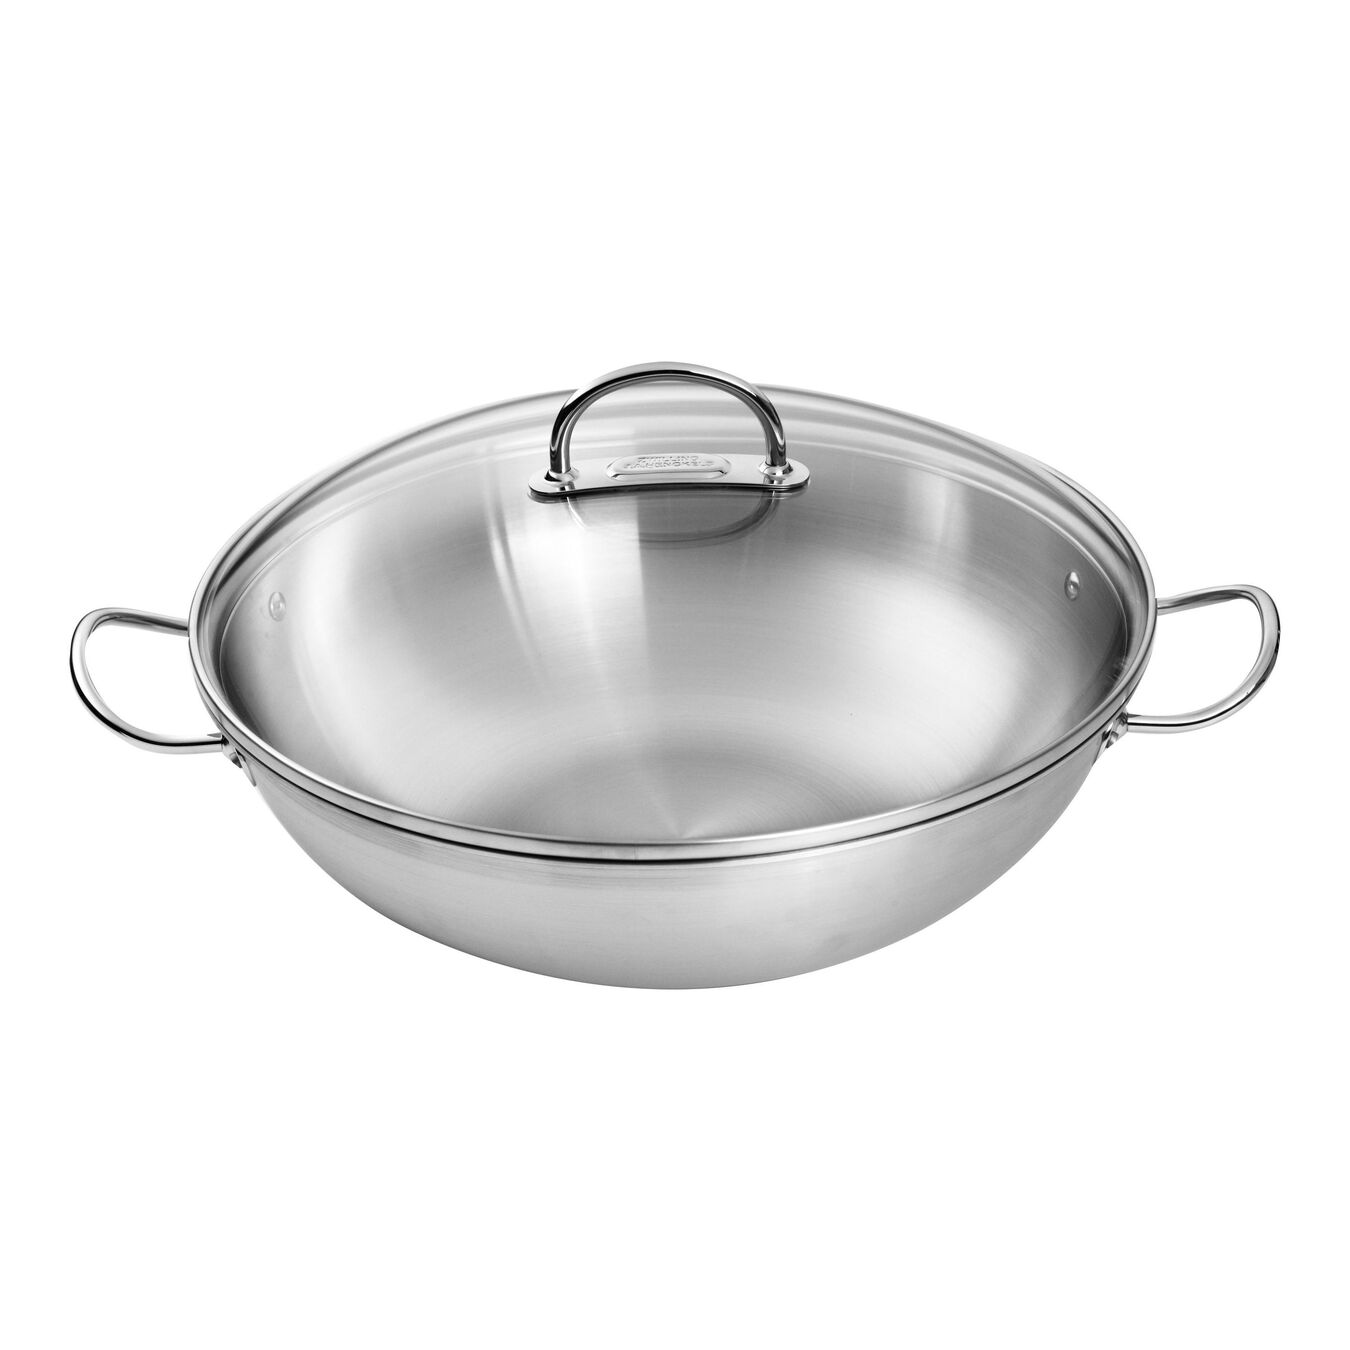 36 cm / 14 inch 18/10 Stainless Steel Wok,,large 1